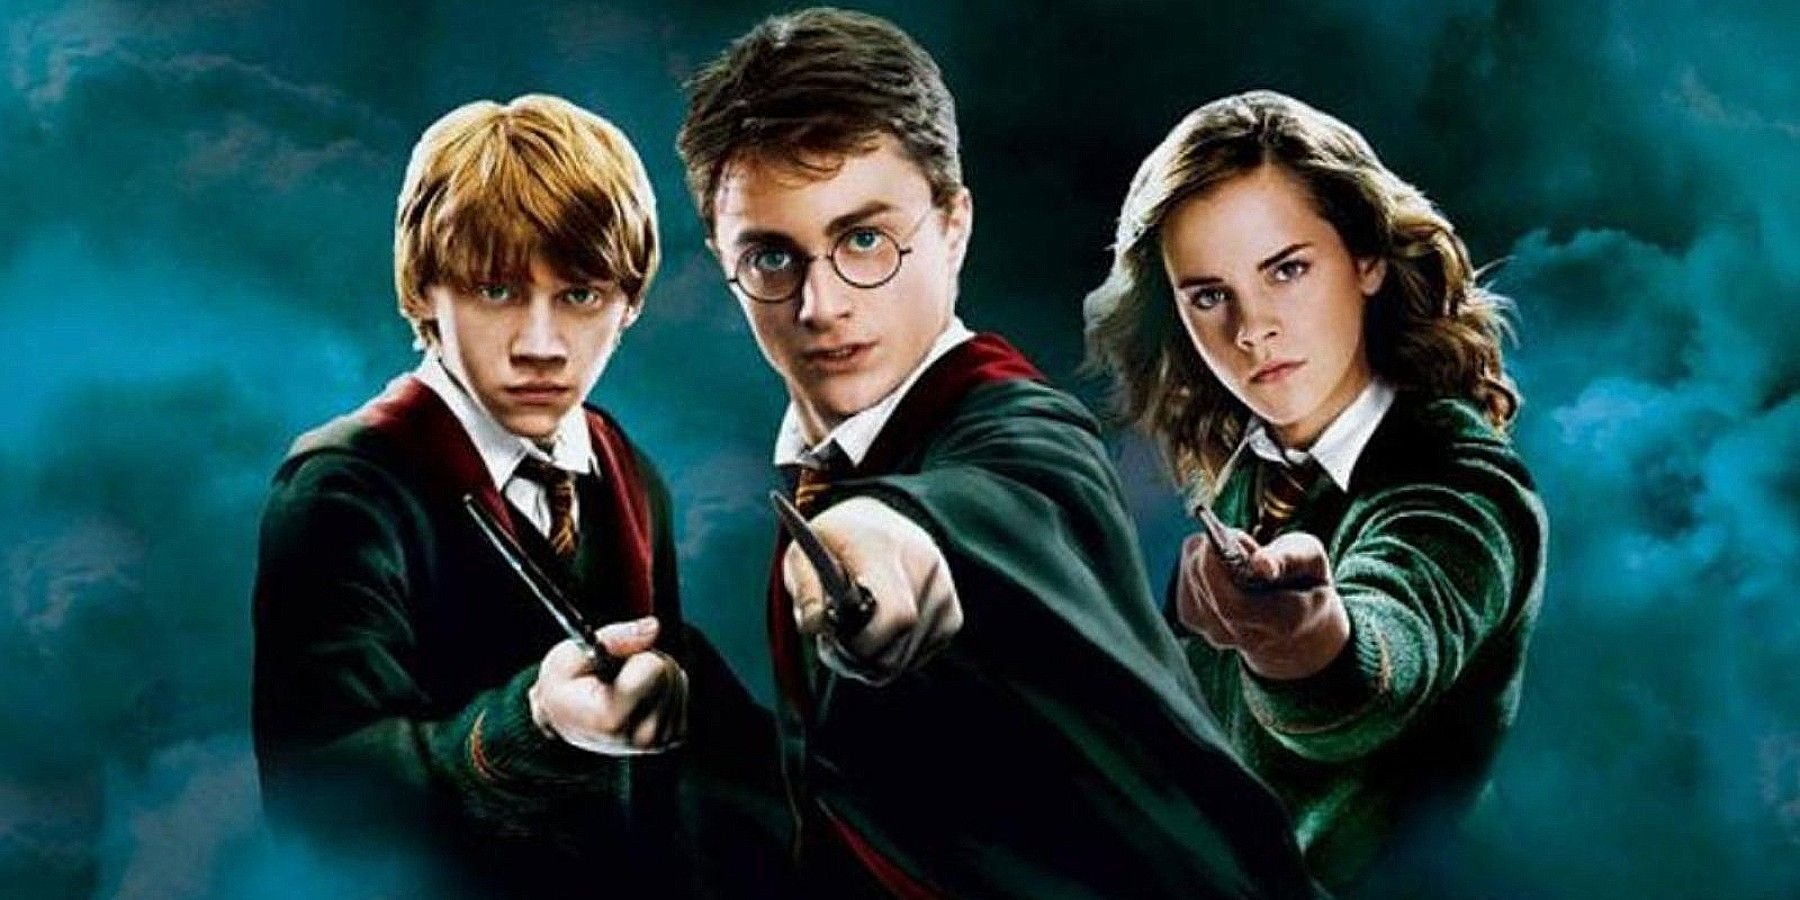 Warner Bros. Is Still Interested In Making More Harry Potter Content